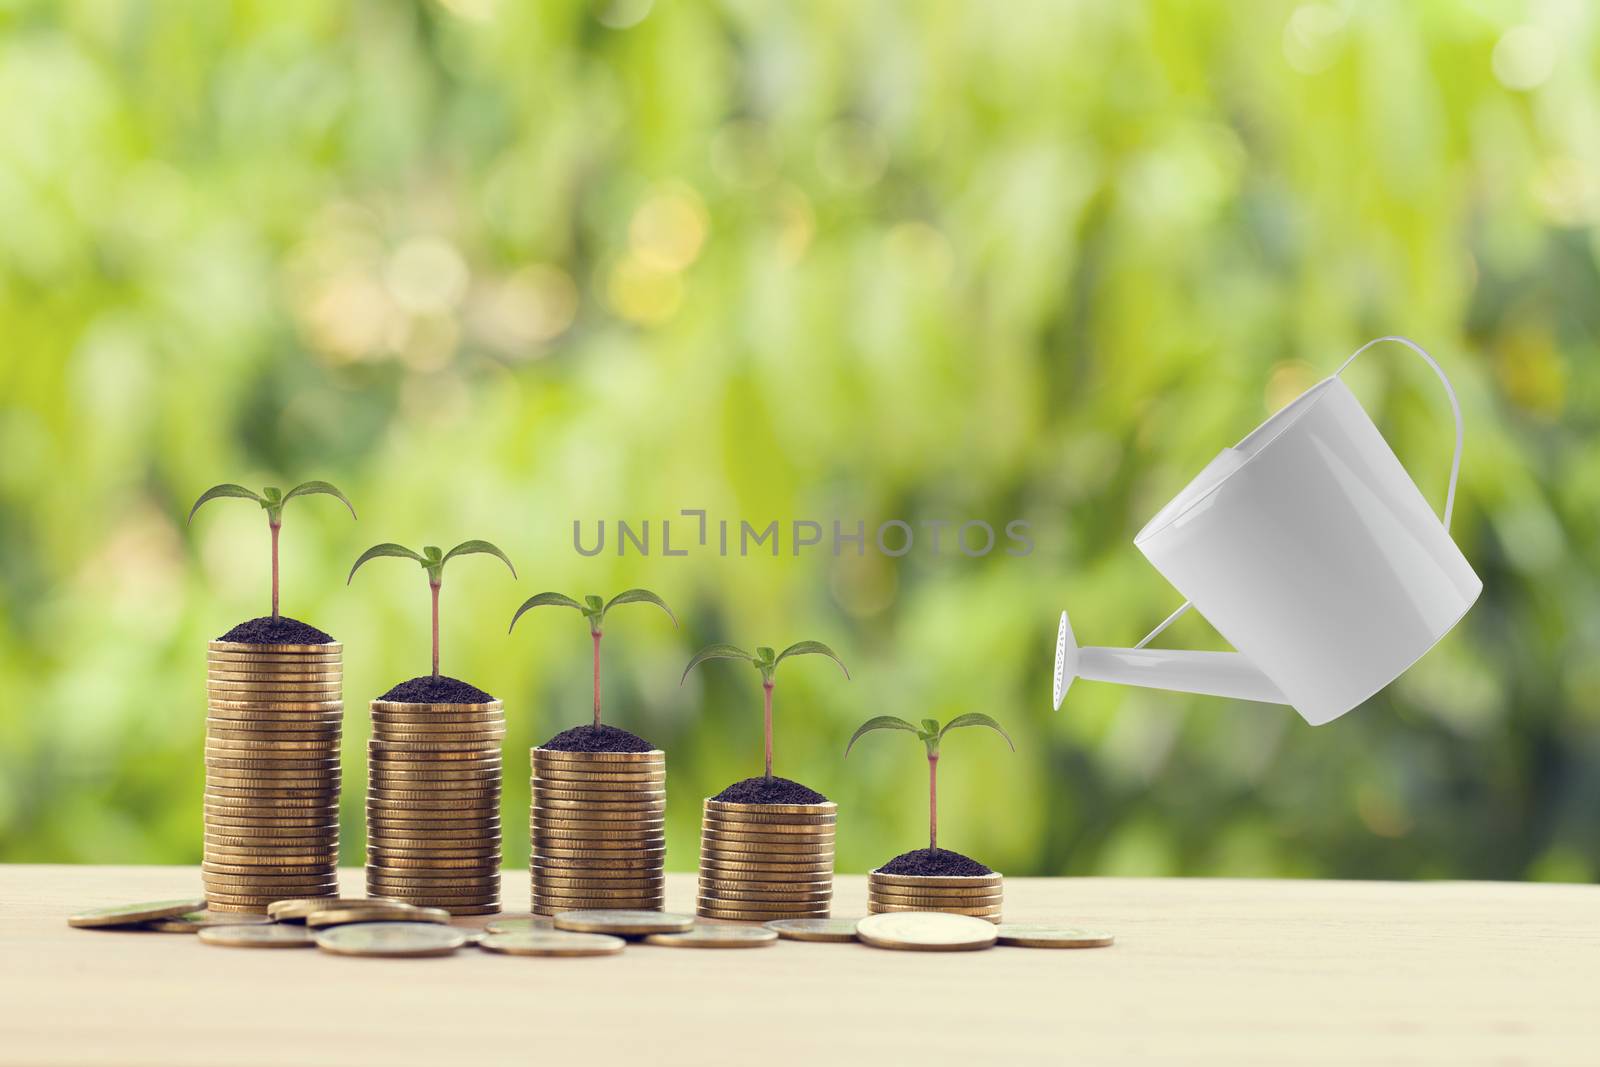 Banking and finance, Saving money concept: Water being poured on green sprout on rows of increasing coins on wood table in the natural green background. Depicts asset security for sustainable growth. by setila